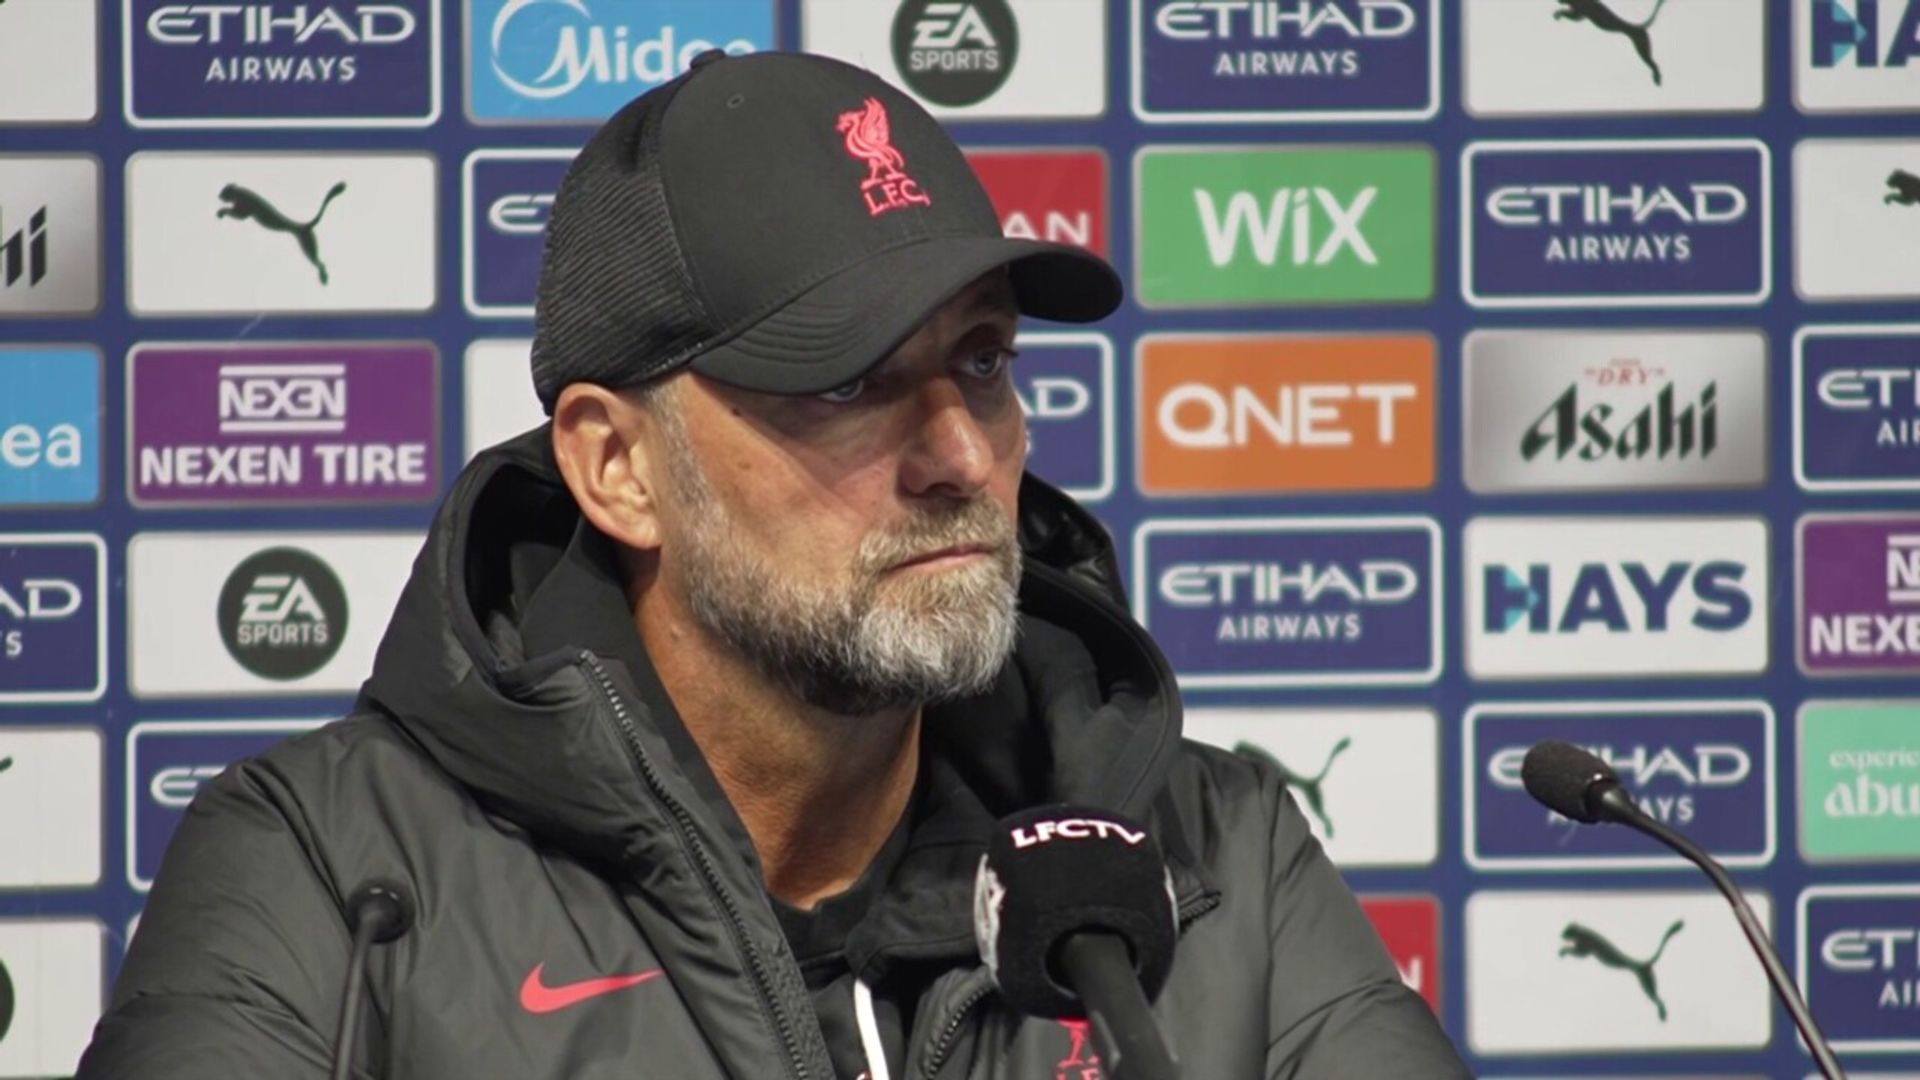 Klopp: City could do what they wanted | 'Not sure we'd have beaten 10 men'